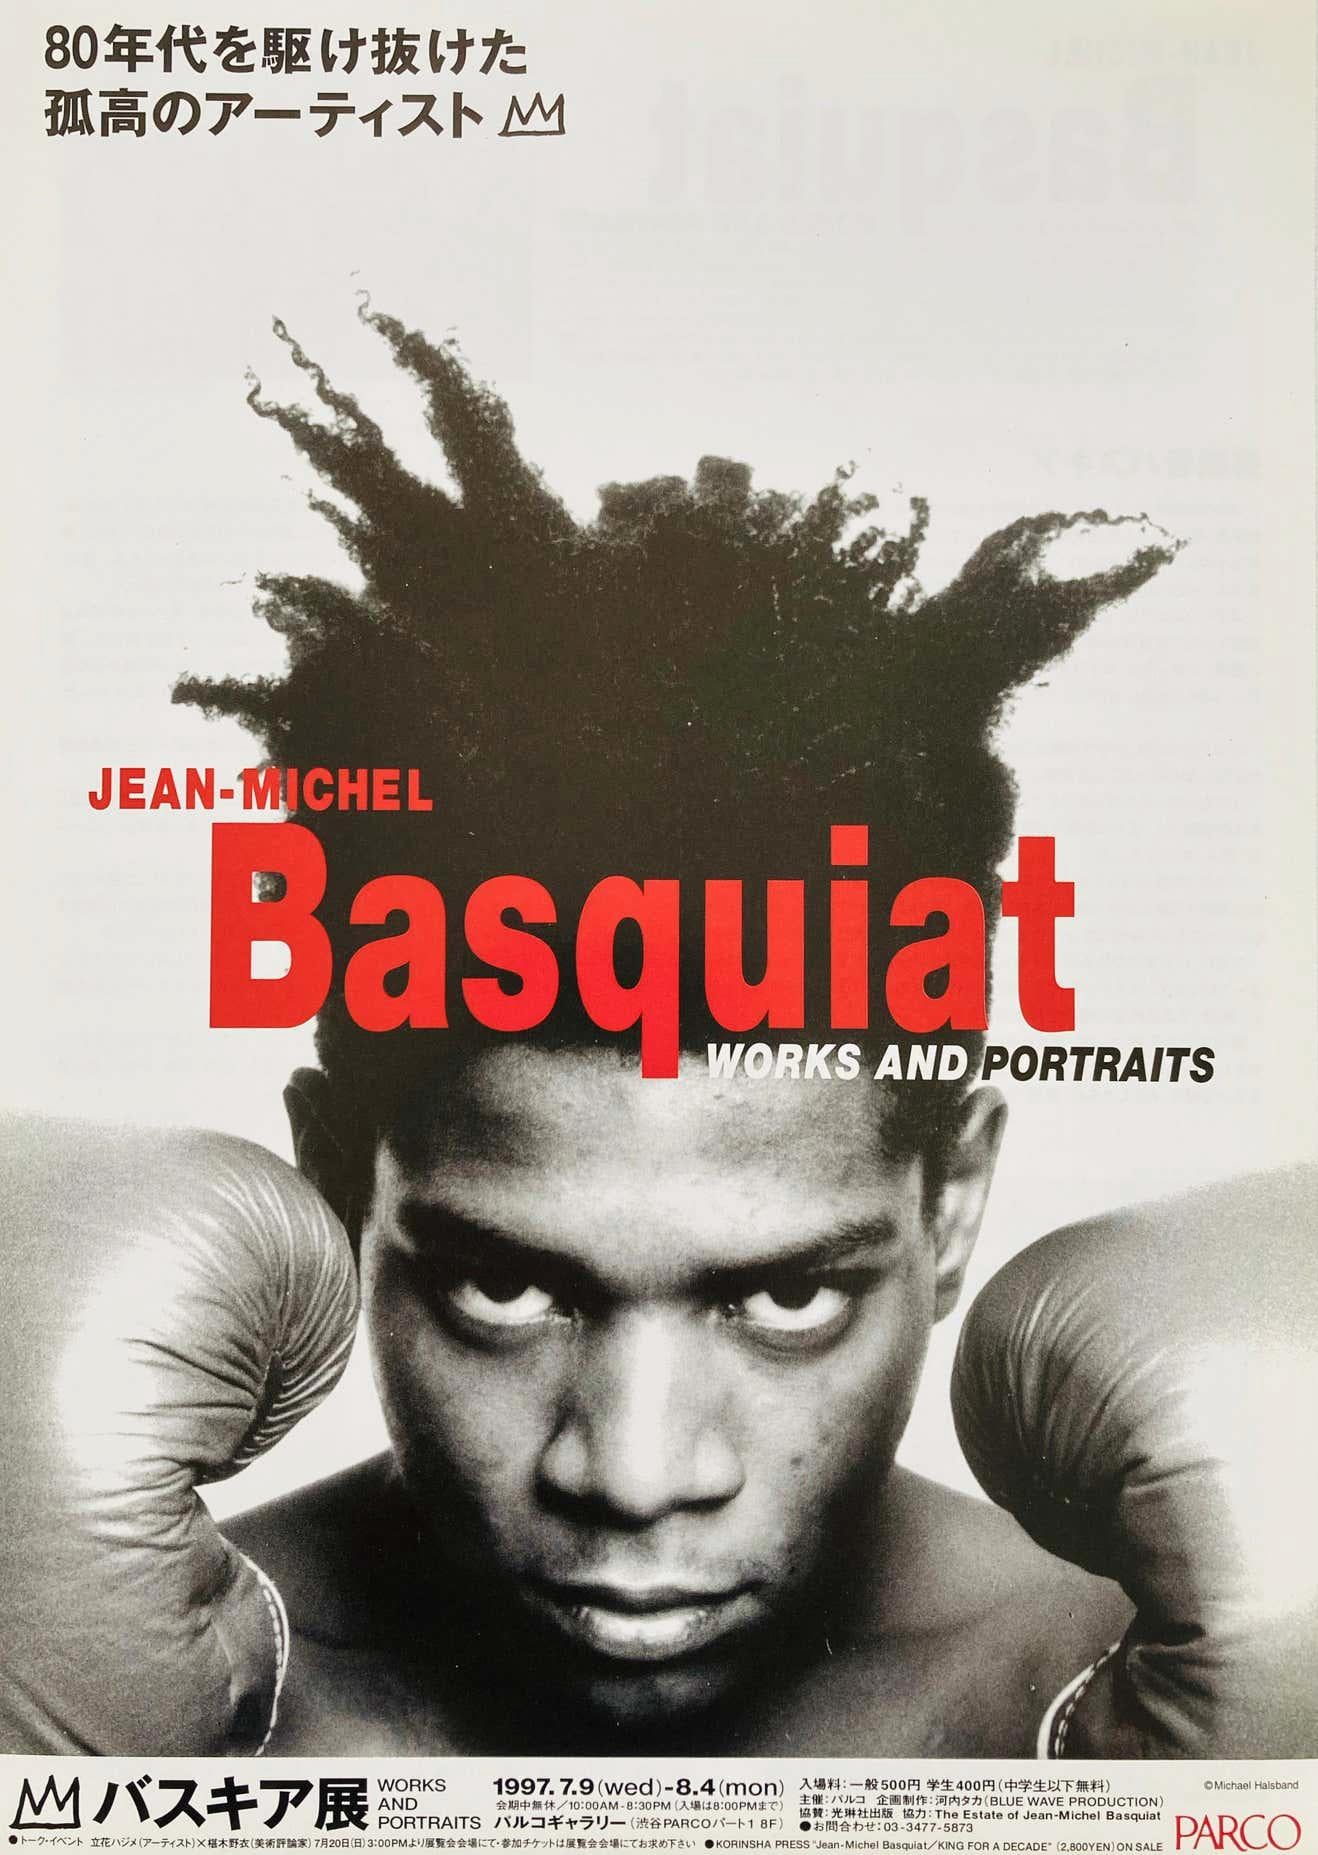 Basquiat Boxing Poster 1997 - Print by after Jean-Michel Basquiat